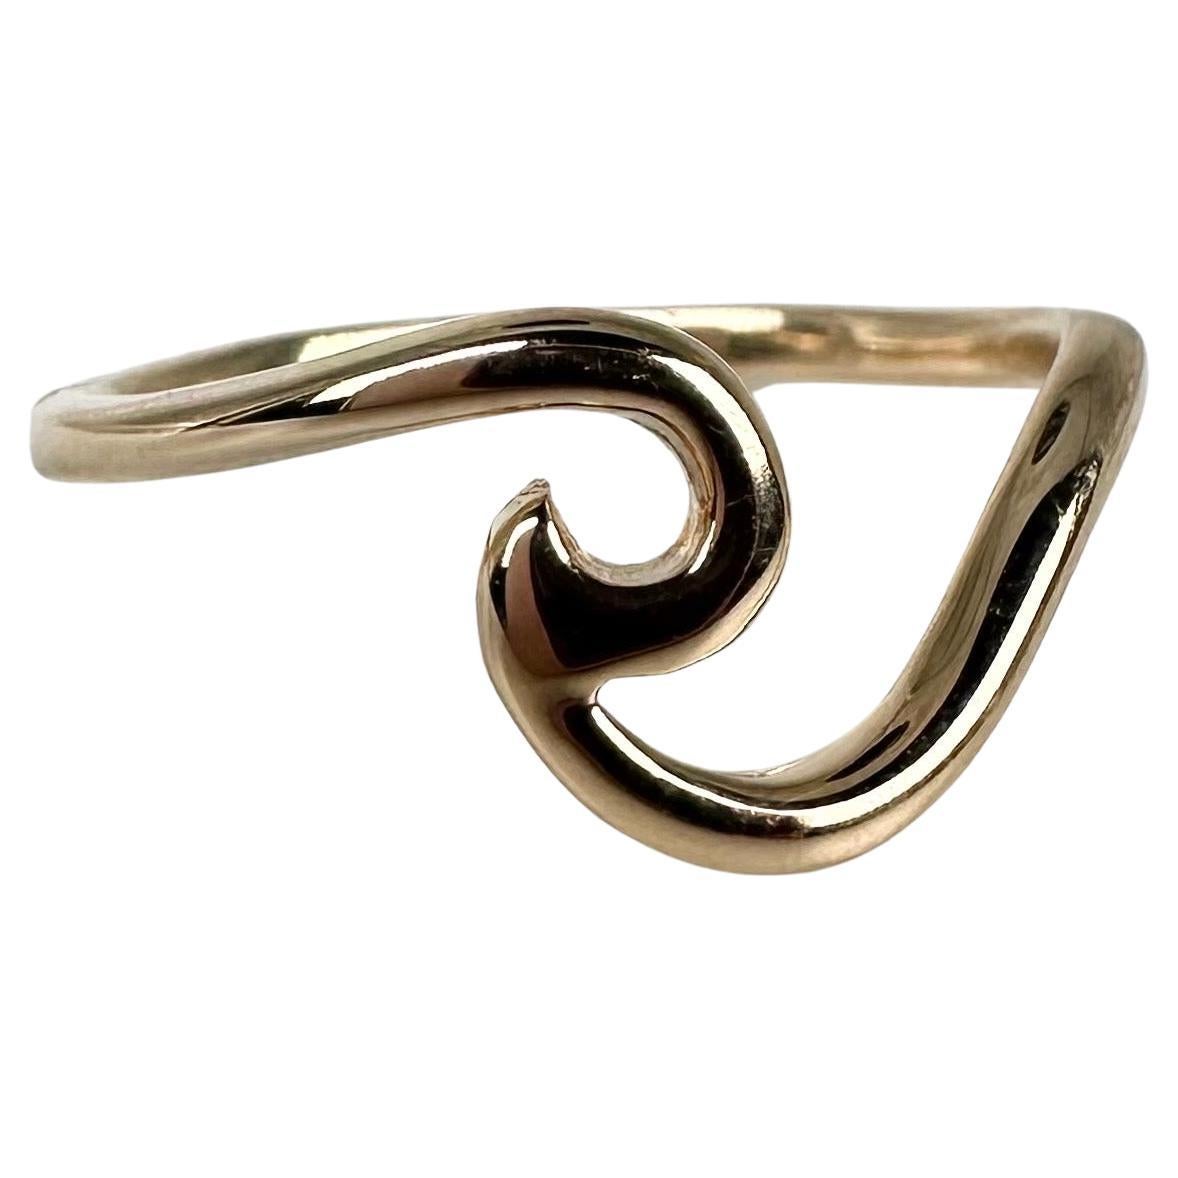 Wave ring Ocean ring 14KT yellow gold ring Florida California Beaches ring For Sale